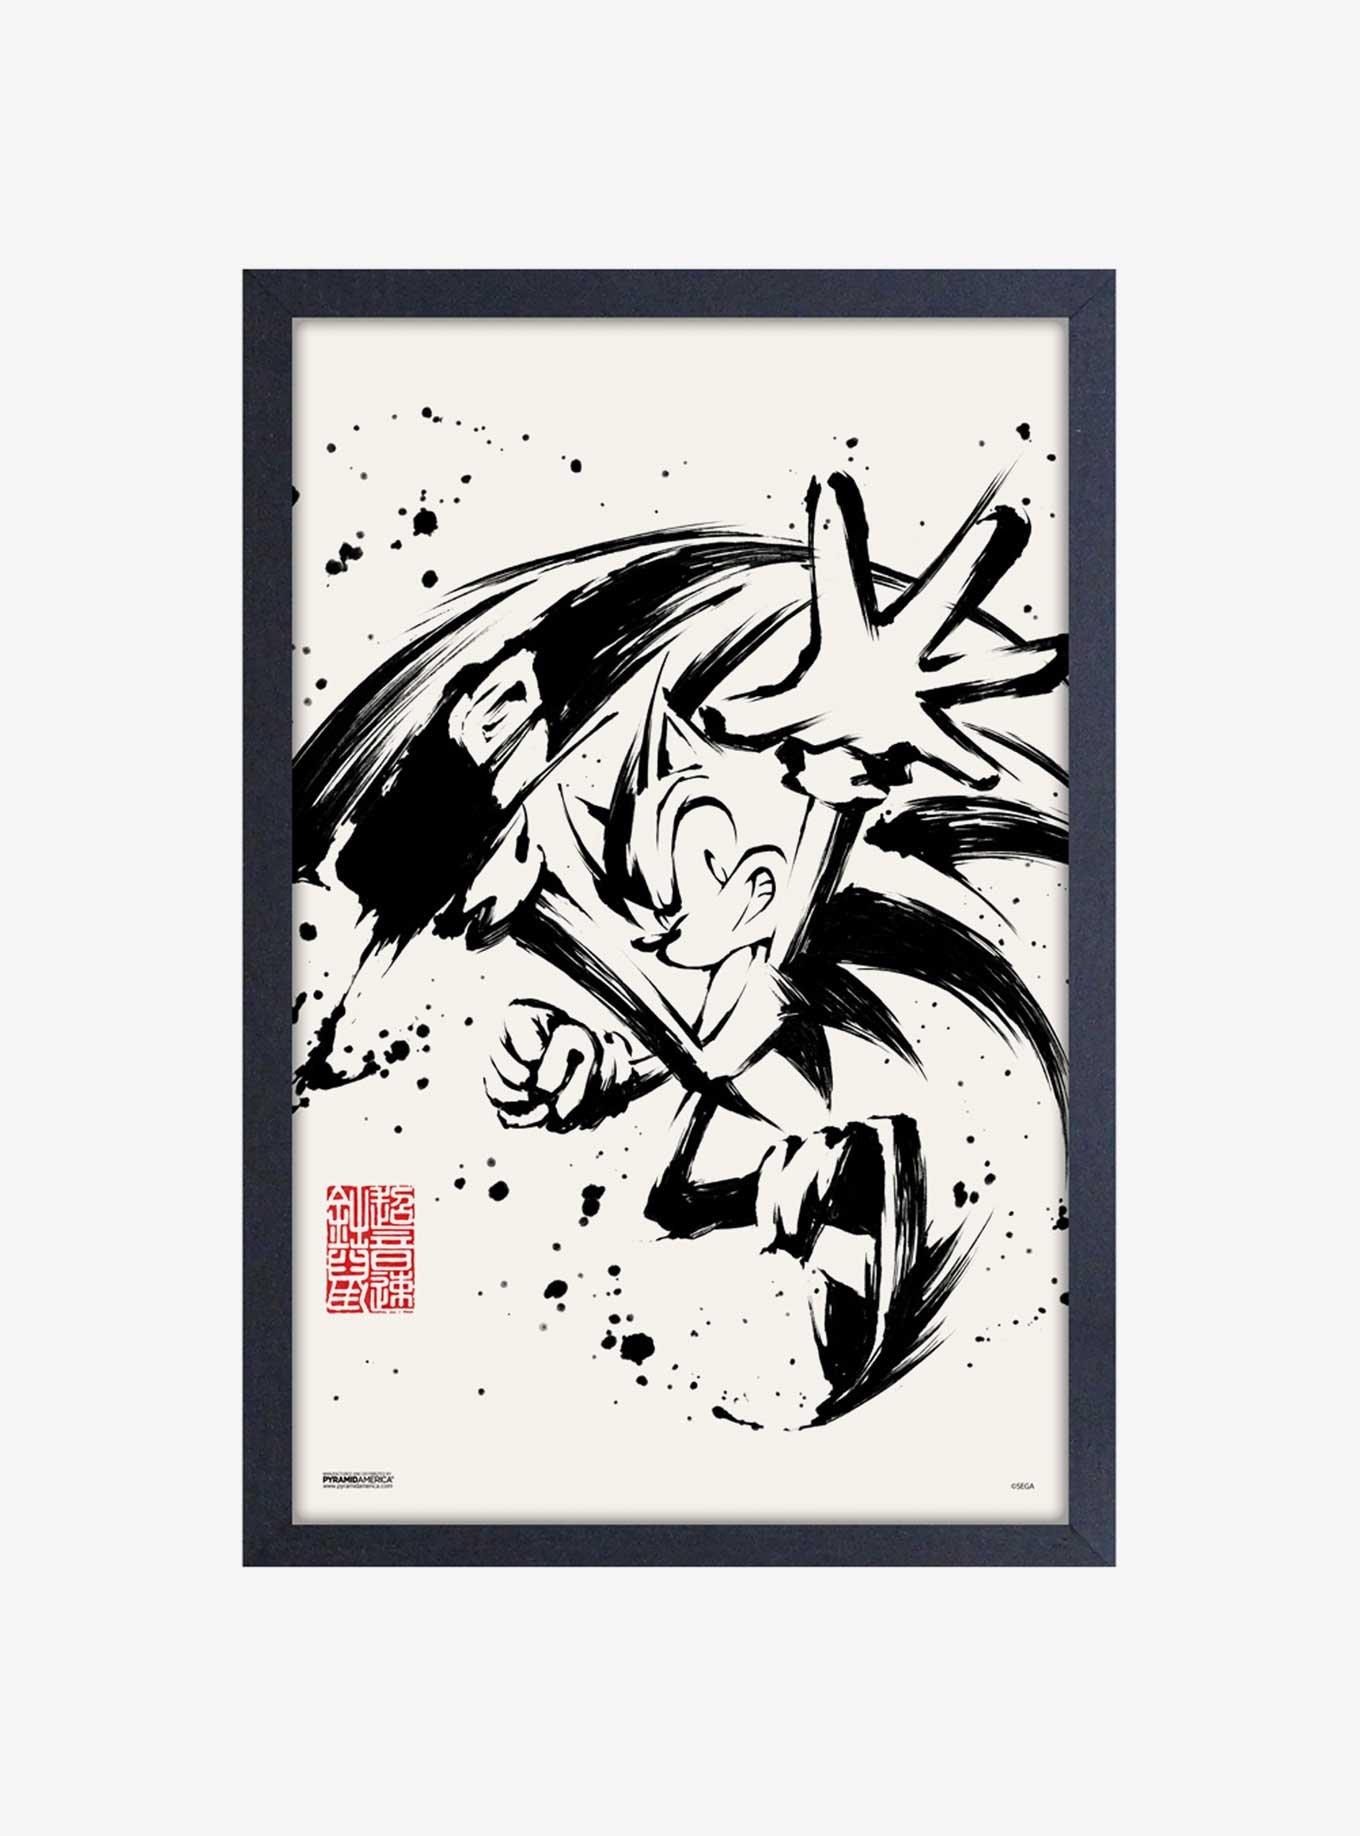 Classic Sonic The Hedgehog Wall Art for Sale